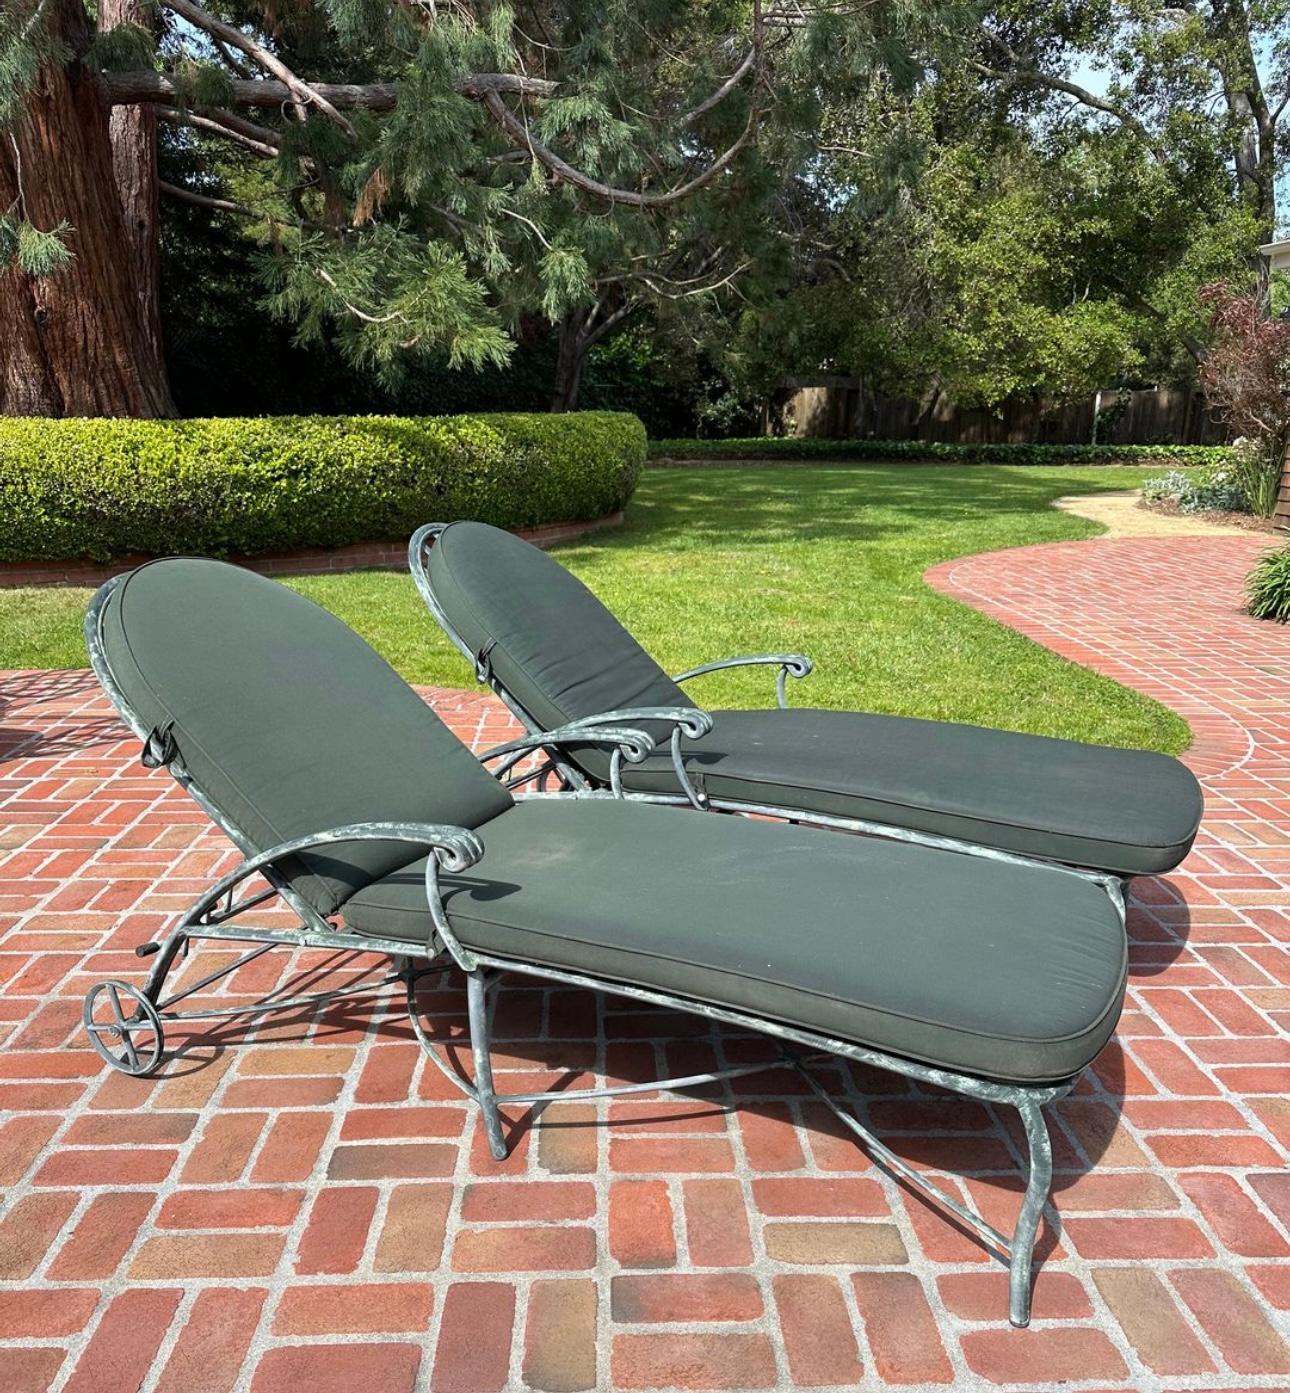 Set of 2 beautiful chaise lounge chairs by Brown Jordan with cushions
Made of cast Aluminum 
On wheels and multi-adjusting back
One of the wheels has the rubber trim around it missing as you see in the pictures
Great looking for any setting
Also